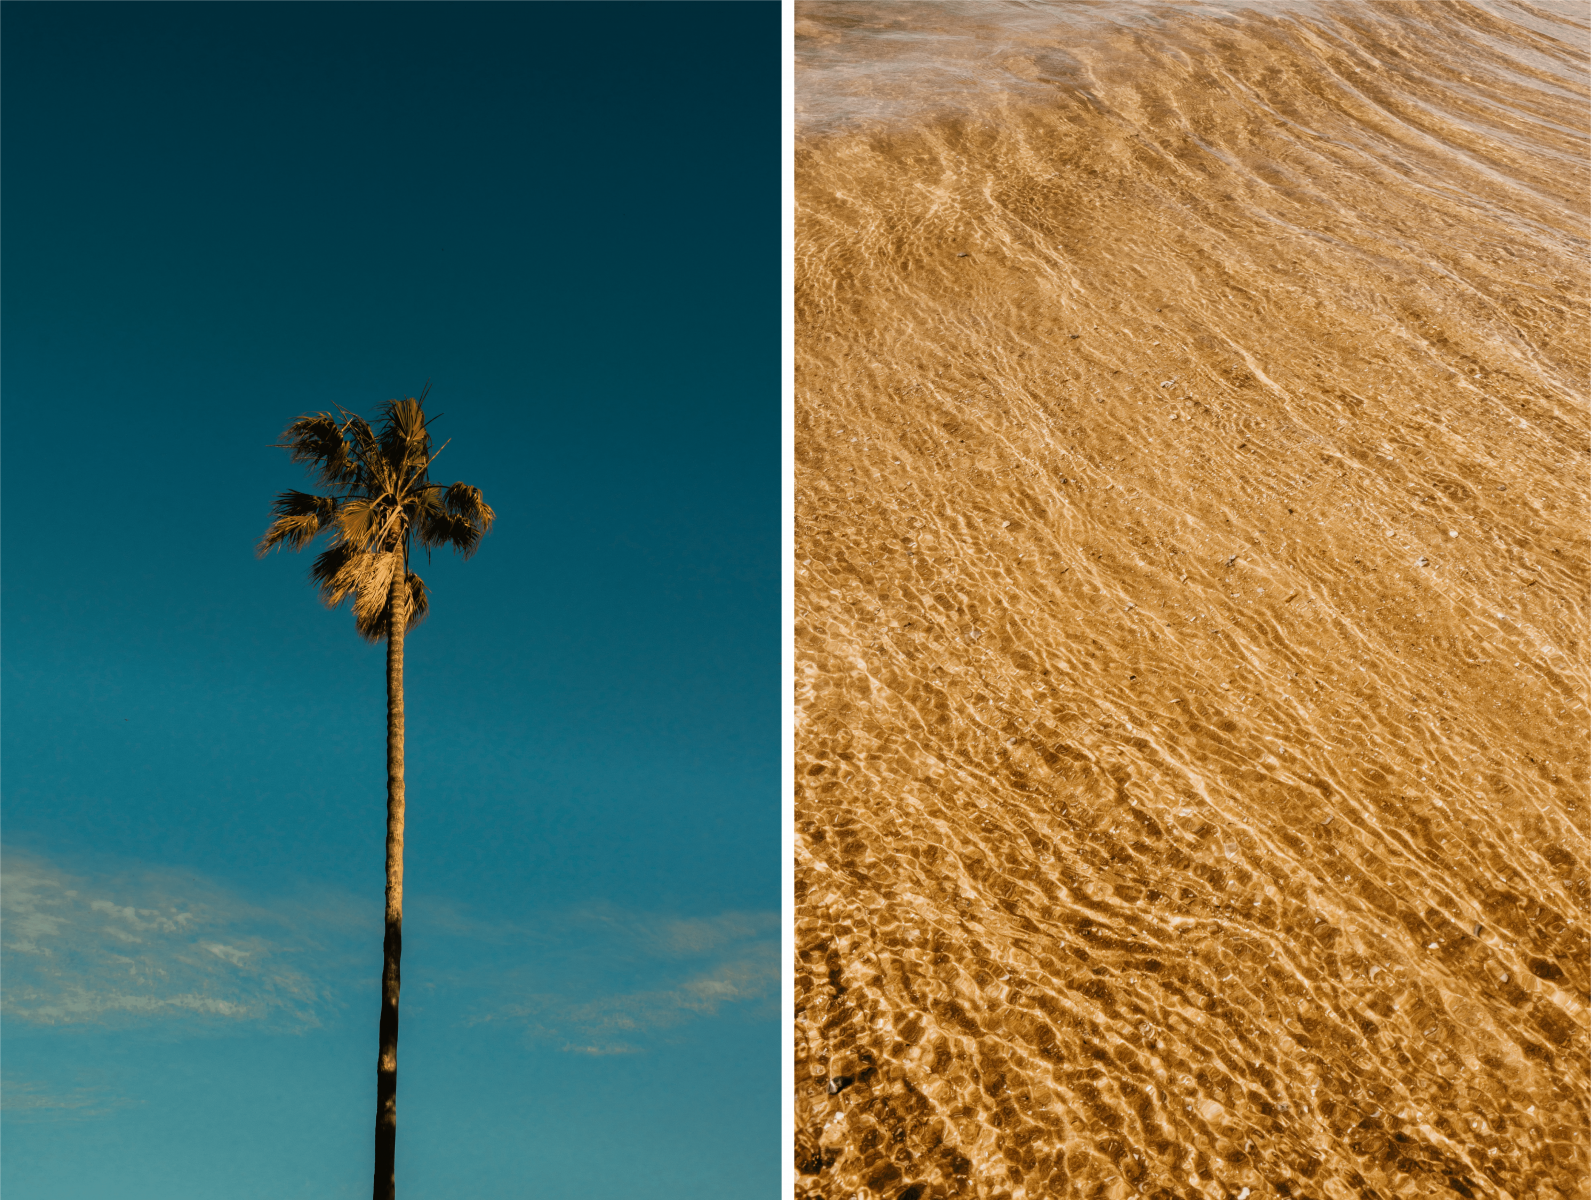 Things that you can see at the Algarve beaches - palm tress and golden sand.